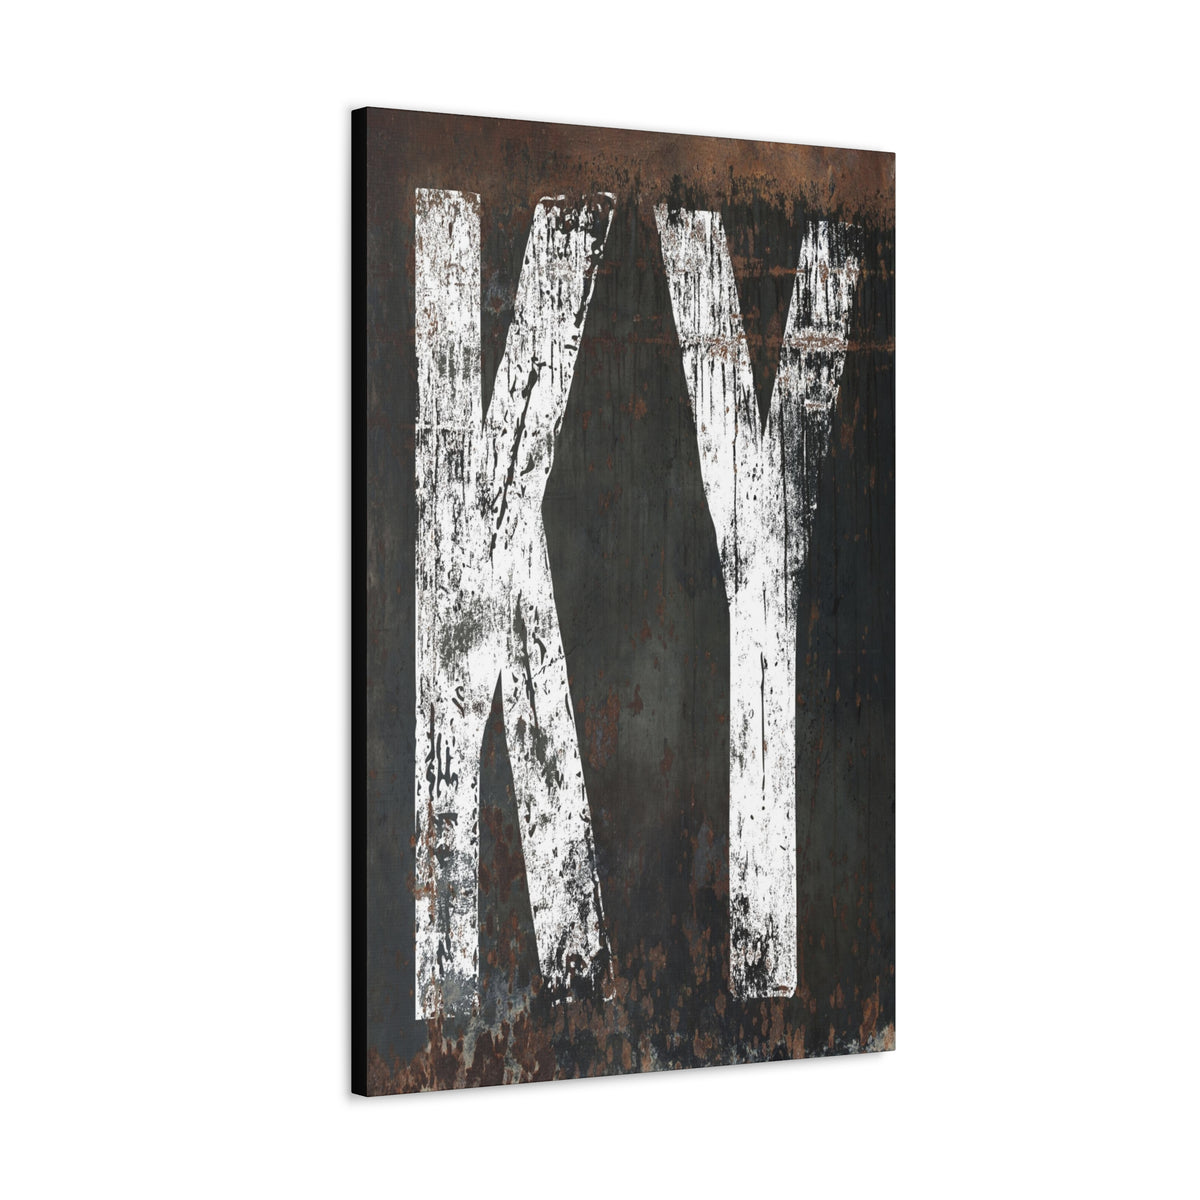 Kentucky State Typography Wall Art - Vintage Industrial & Farmhouse Fusion, Authentic KY Home Canvas